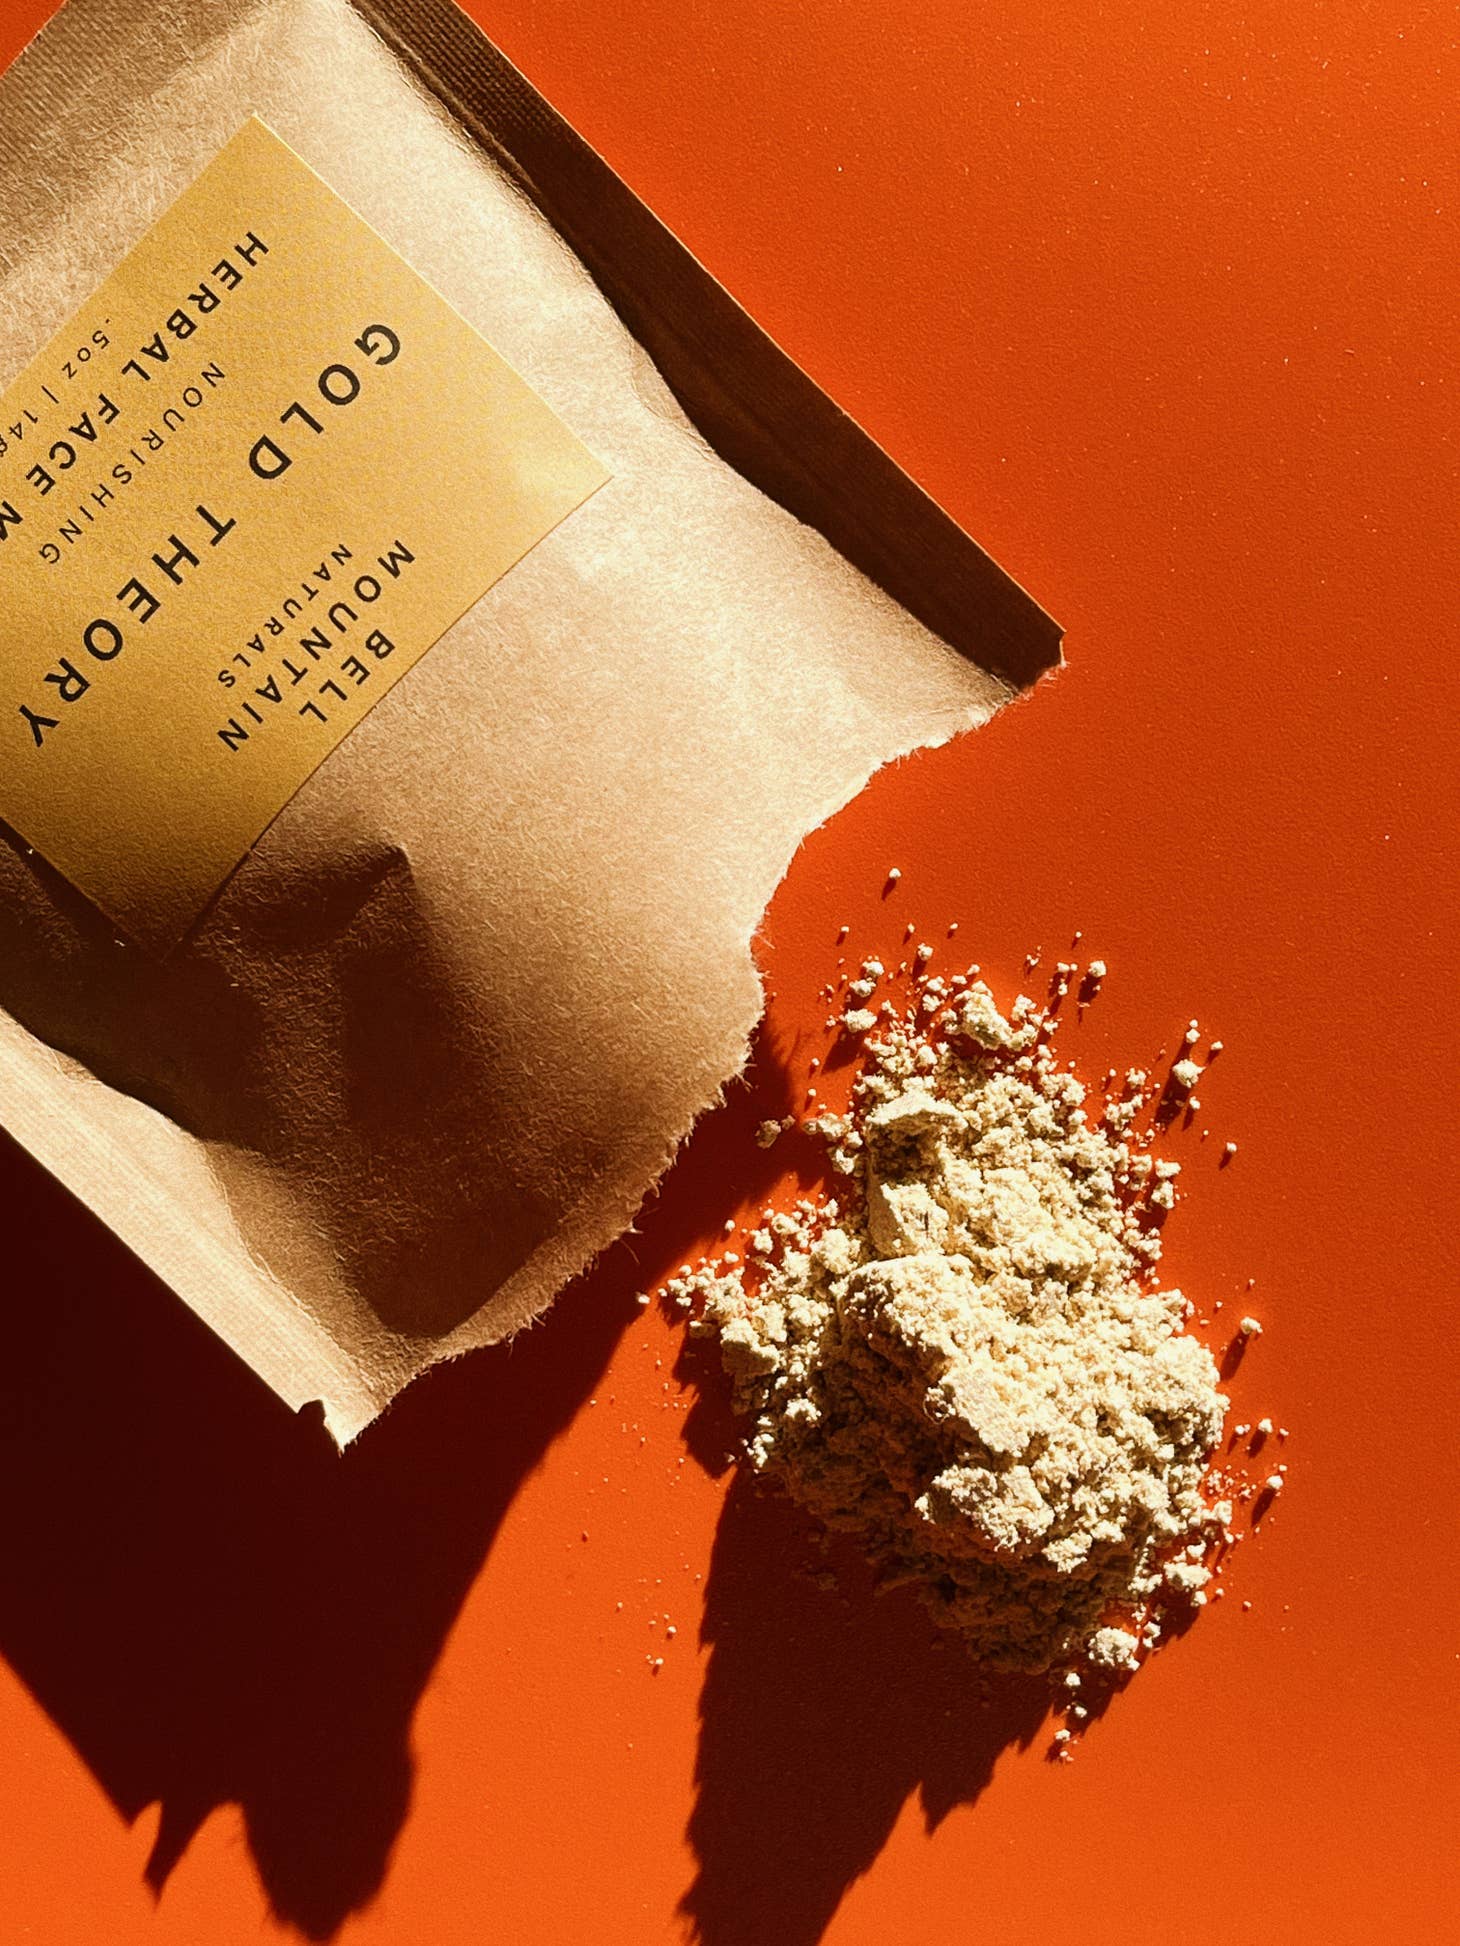 Gold Theory powder face mask is vibrant & botanical. Made with gentle, skin loving ingredients that will leave your face feeling restored, balanced and fresh. This mask is gentle yet effective, perfect for all skin types.